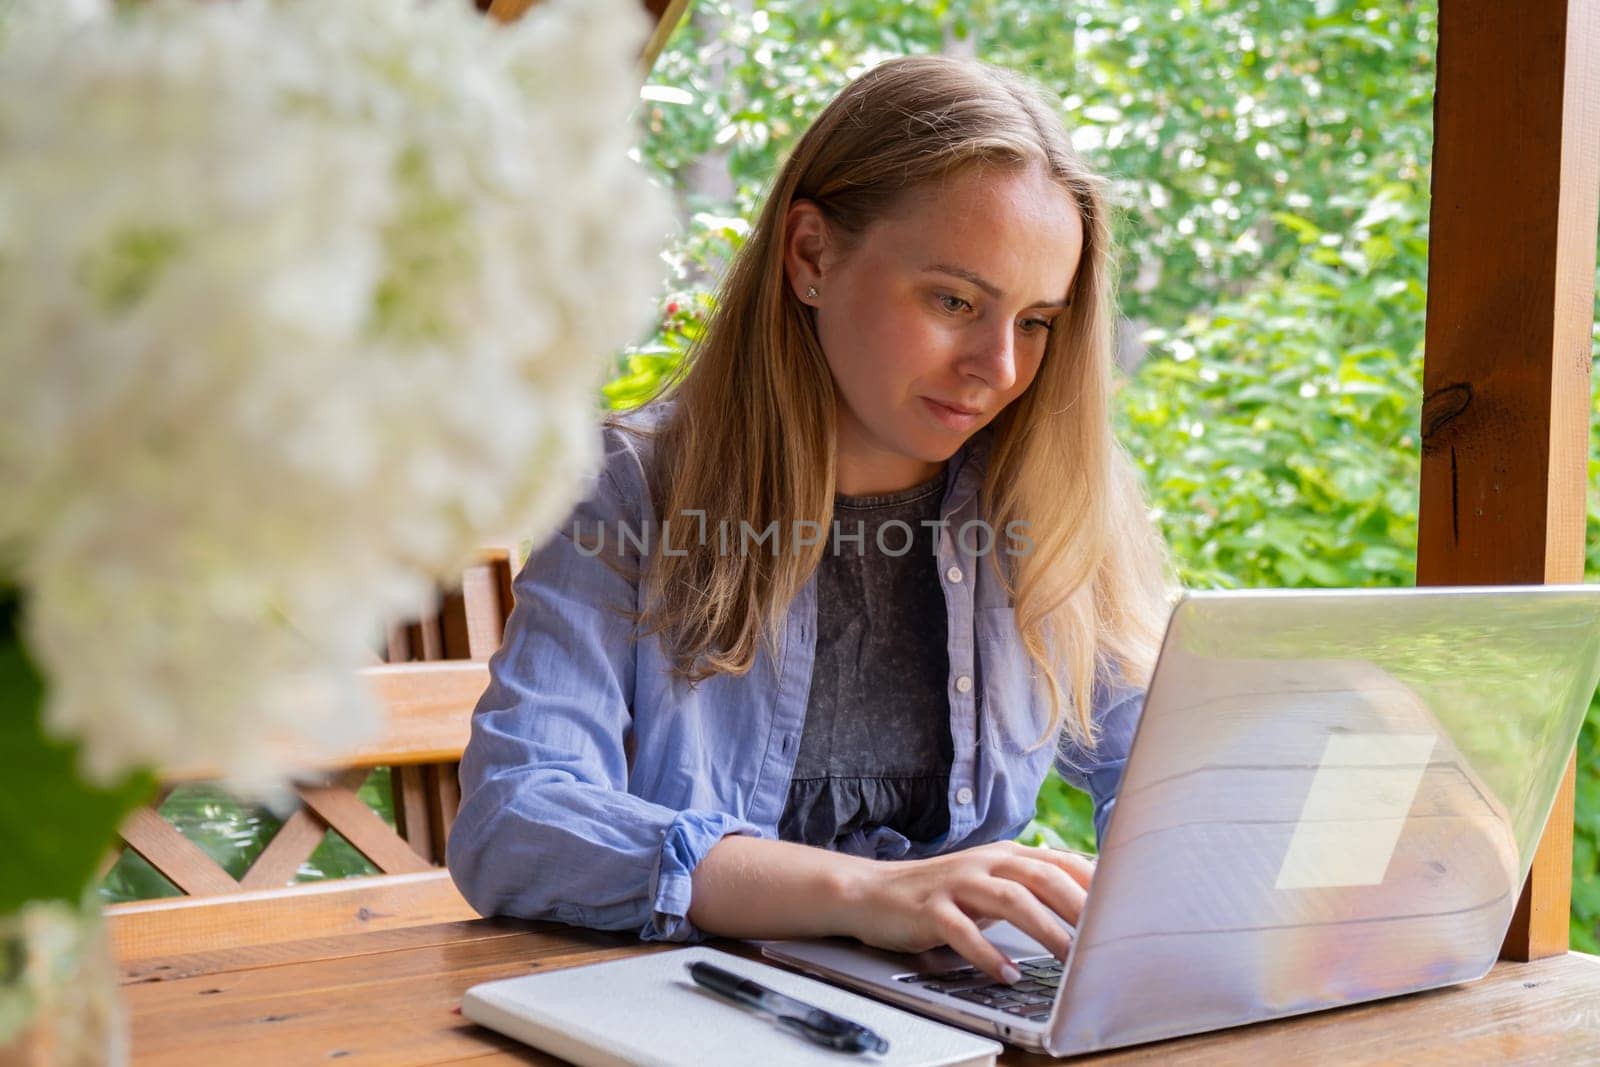 Young happy woman focuses on her laptop in wooden alcove. Relaxed outdoor setting emphasizes comfort and productivity. Remote work learning by anna_stasiia